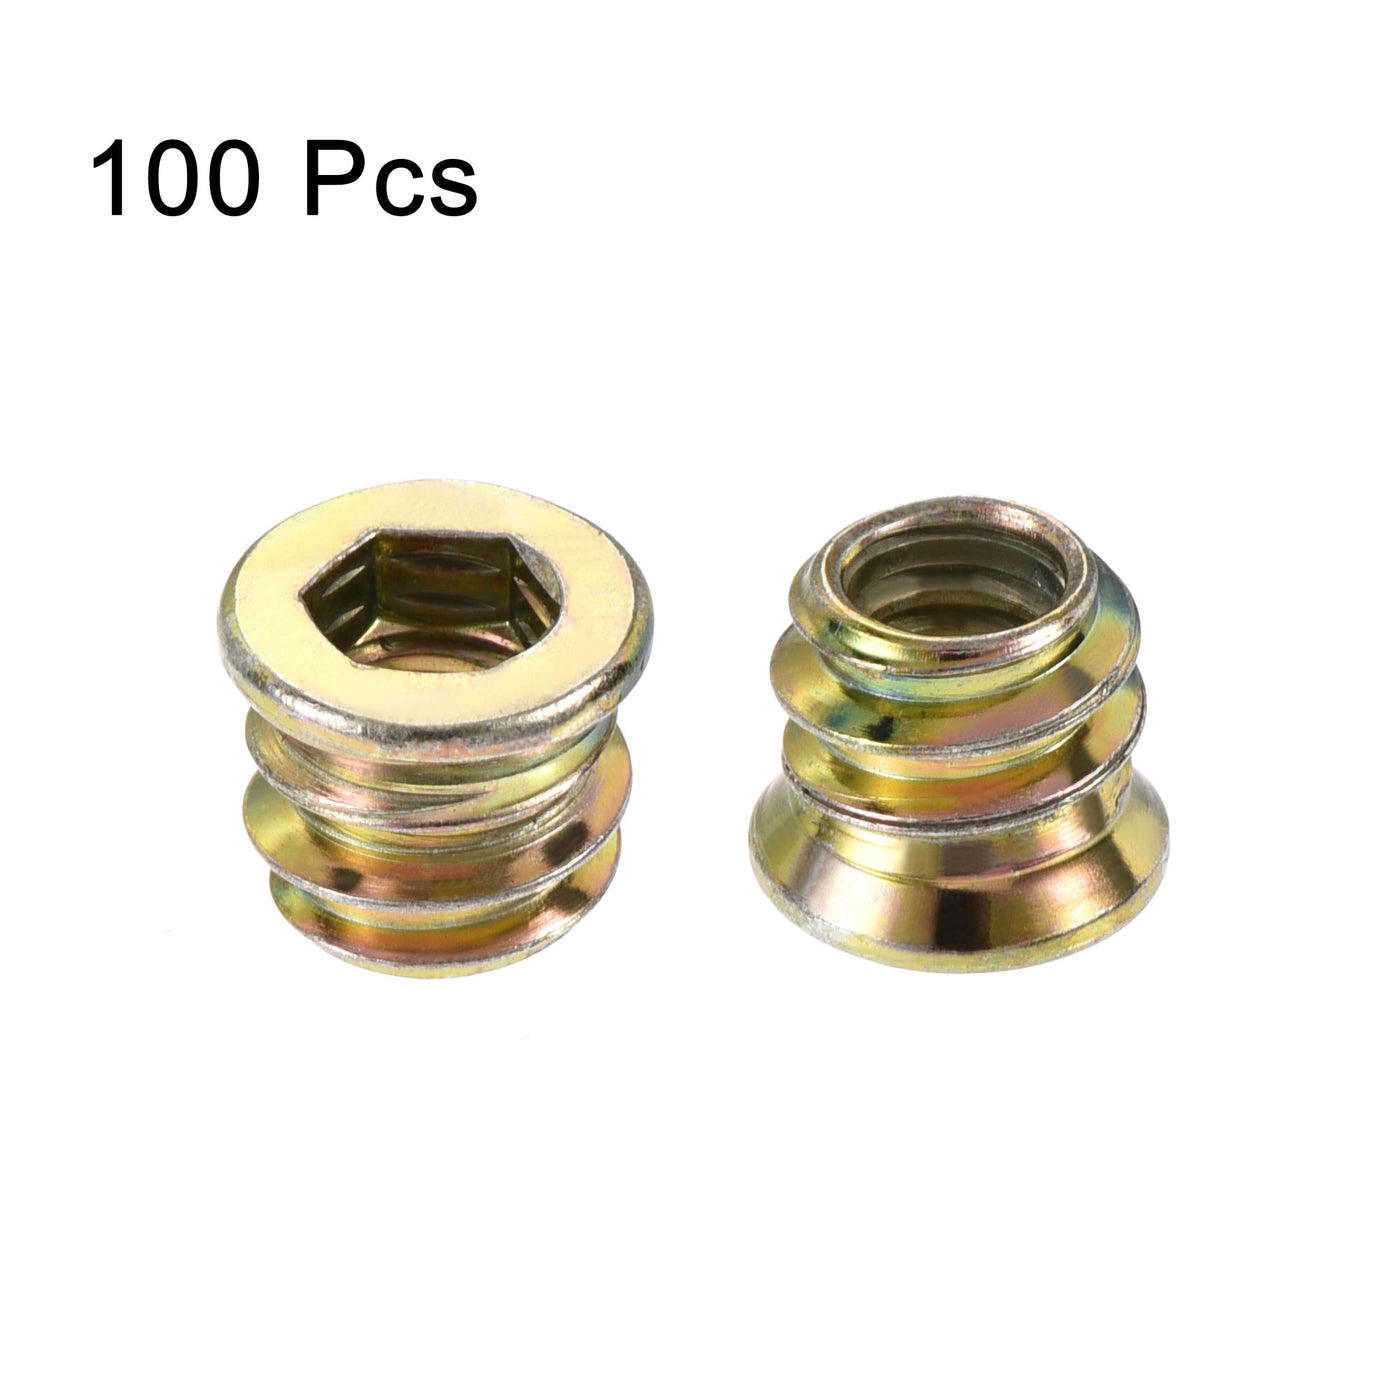 uxcell Uxcell 1/4"-20x10mm Threaded Insert Nuts Hex Socket Drive for Wood Furniture 100pcs